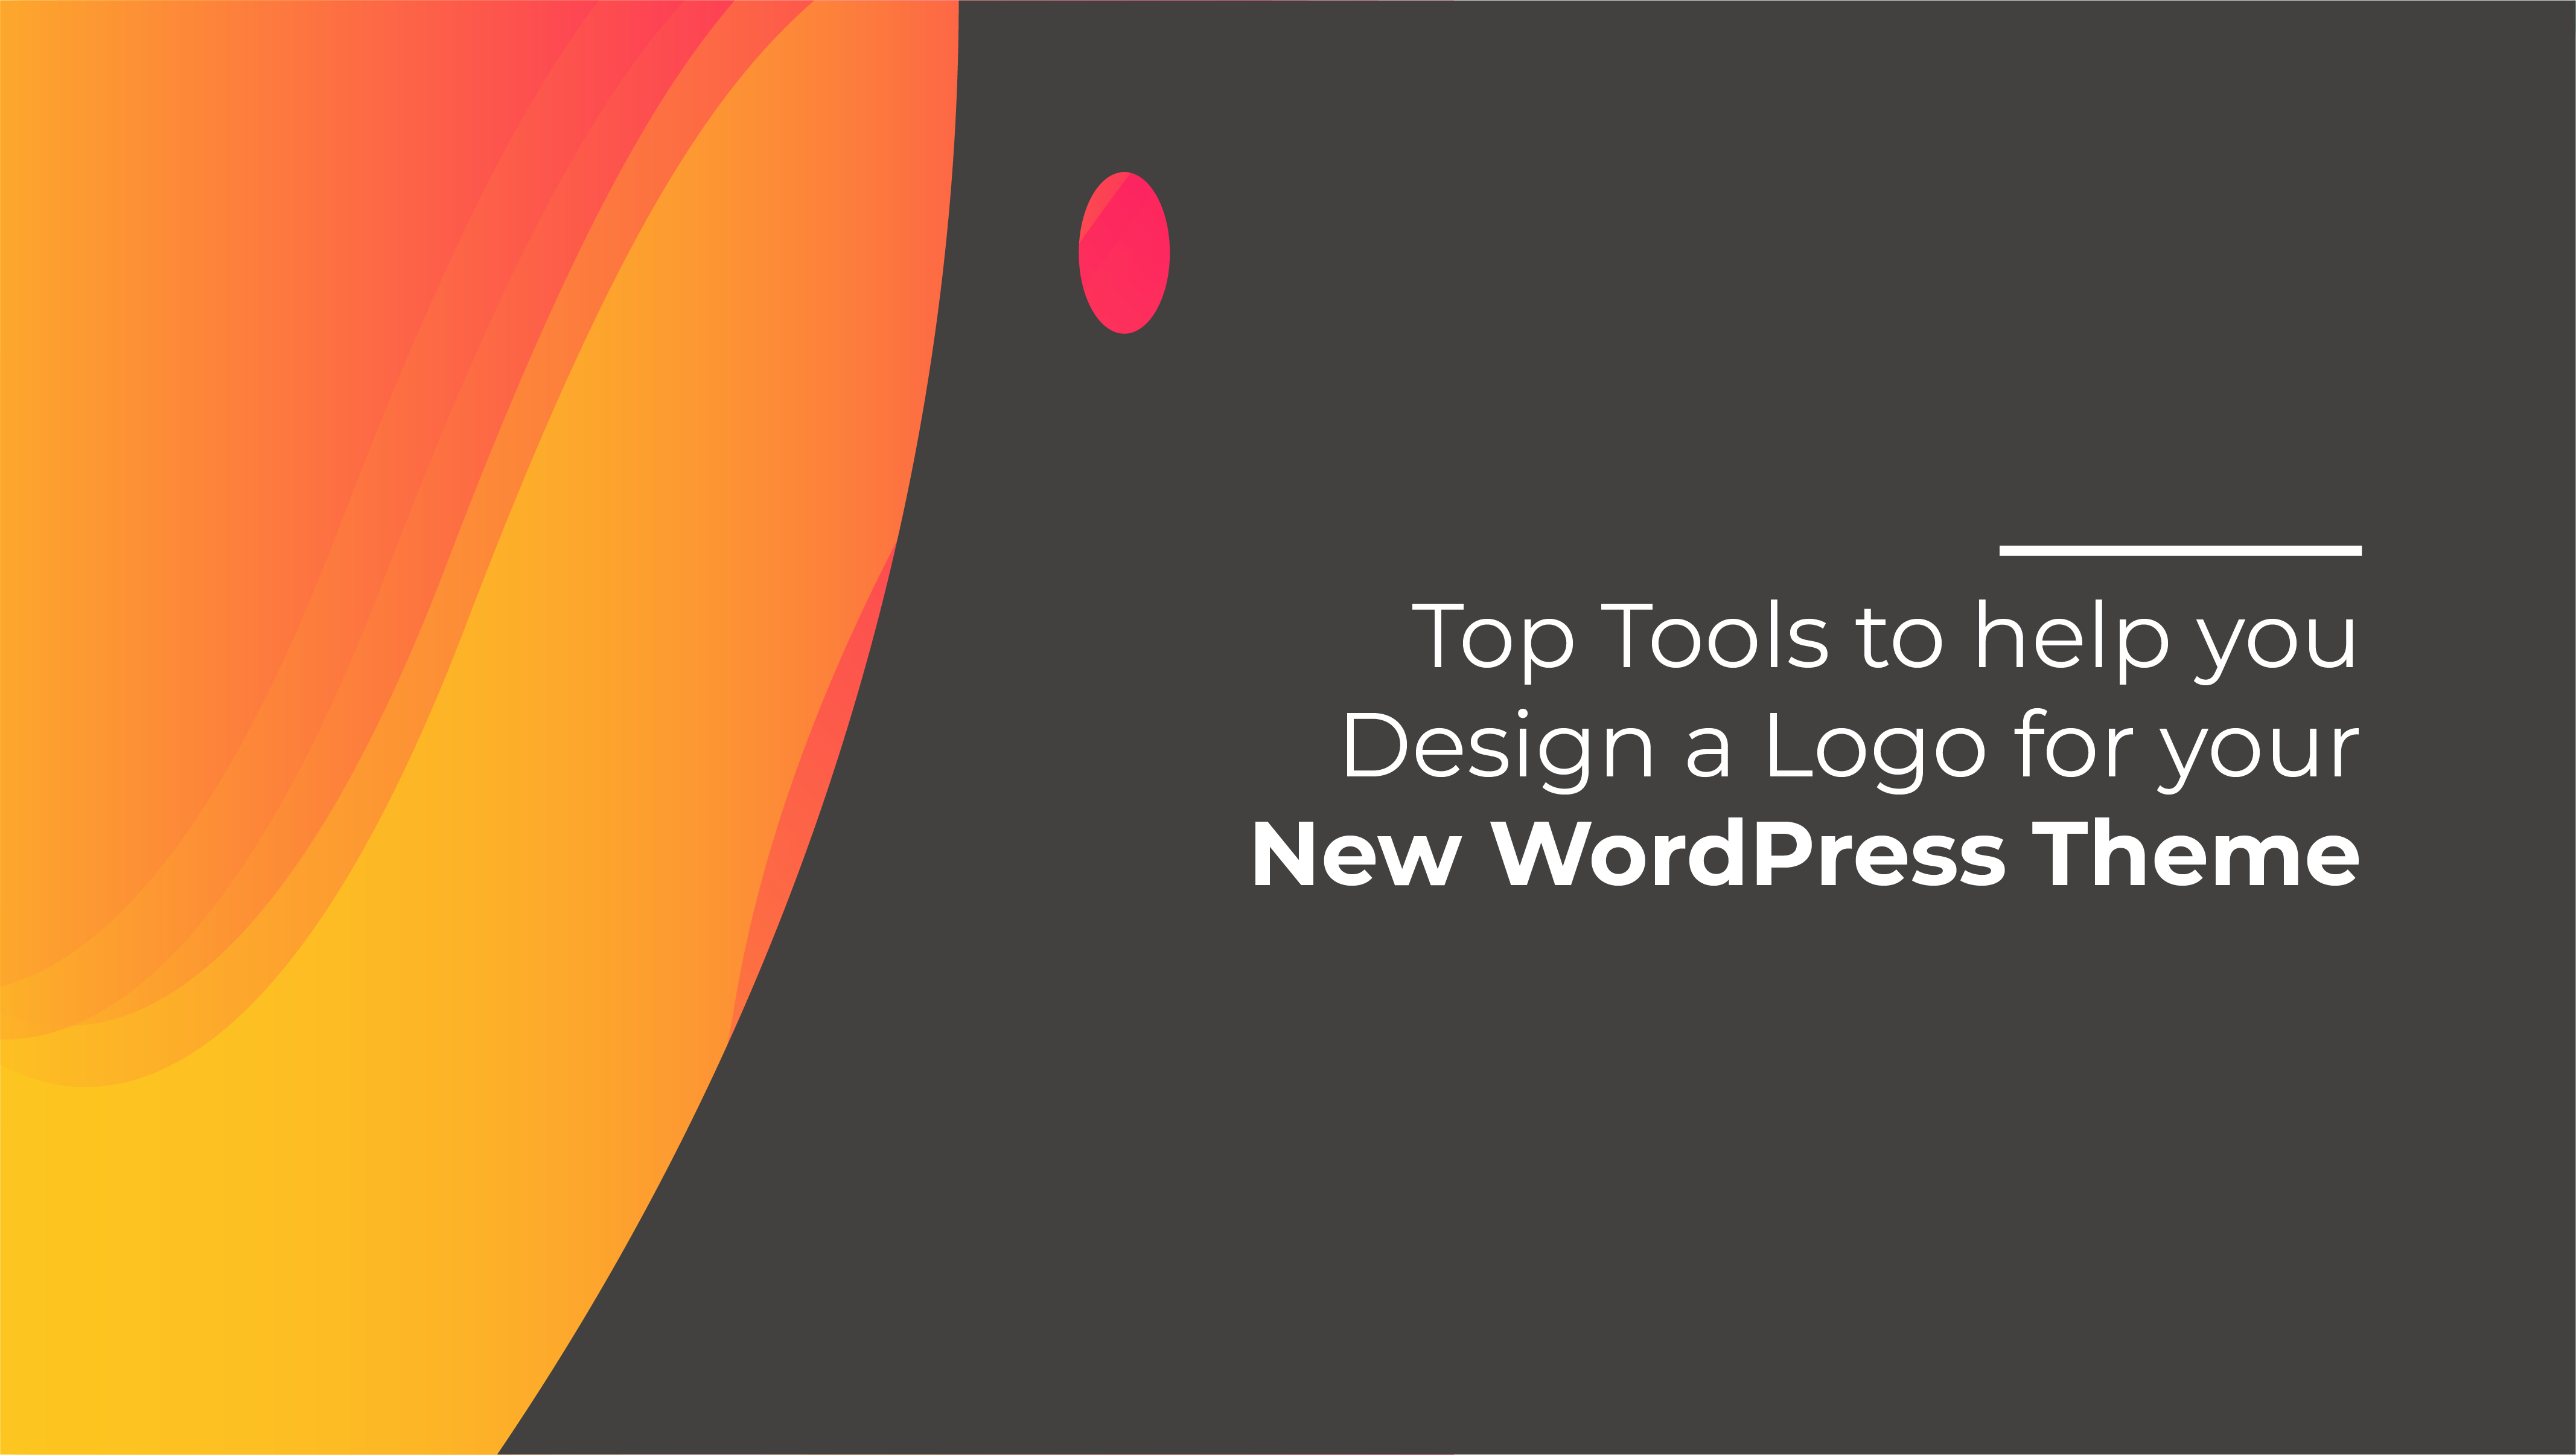 Top Tools to help you Design a Logo for your new WordPress Theme - 2022